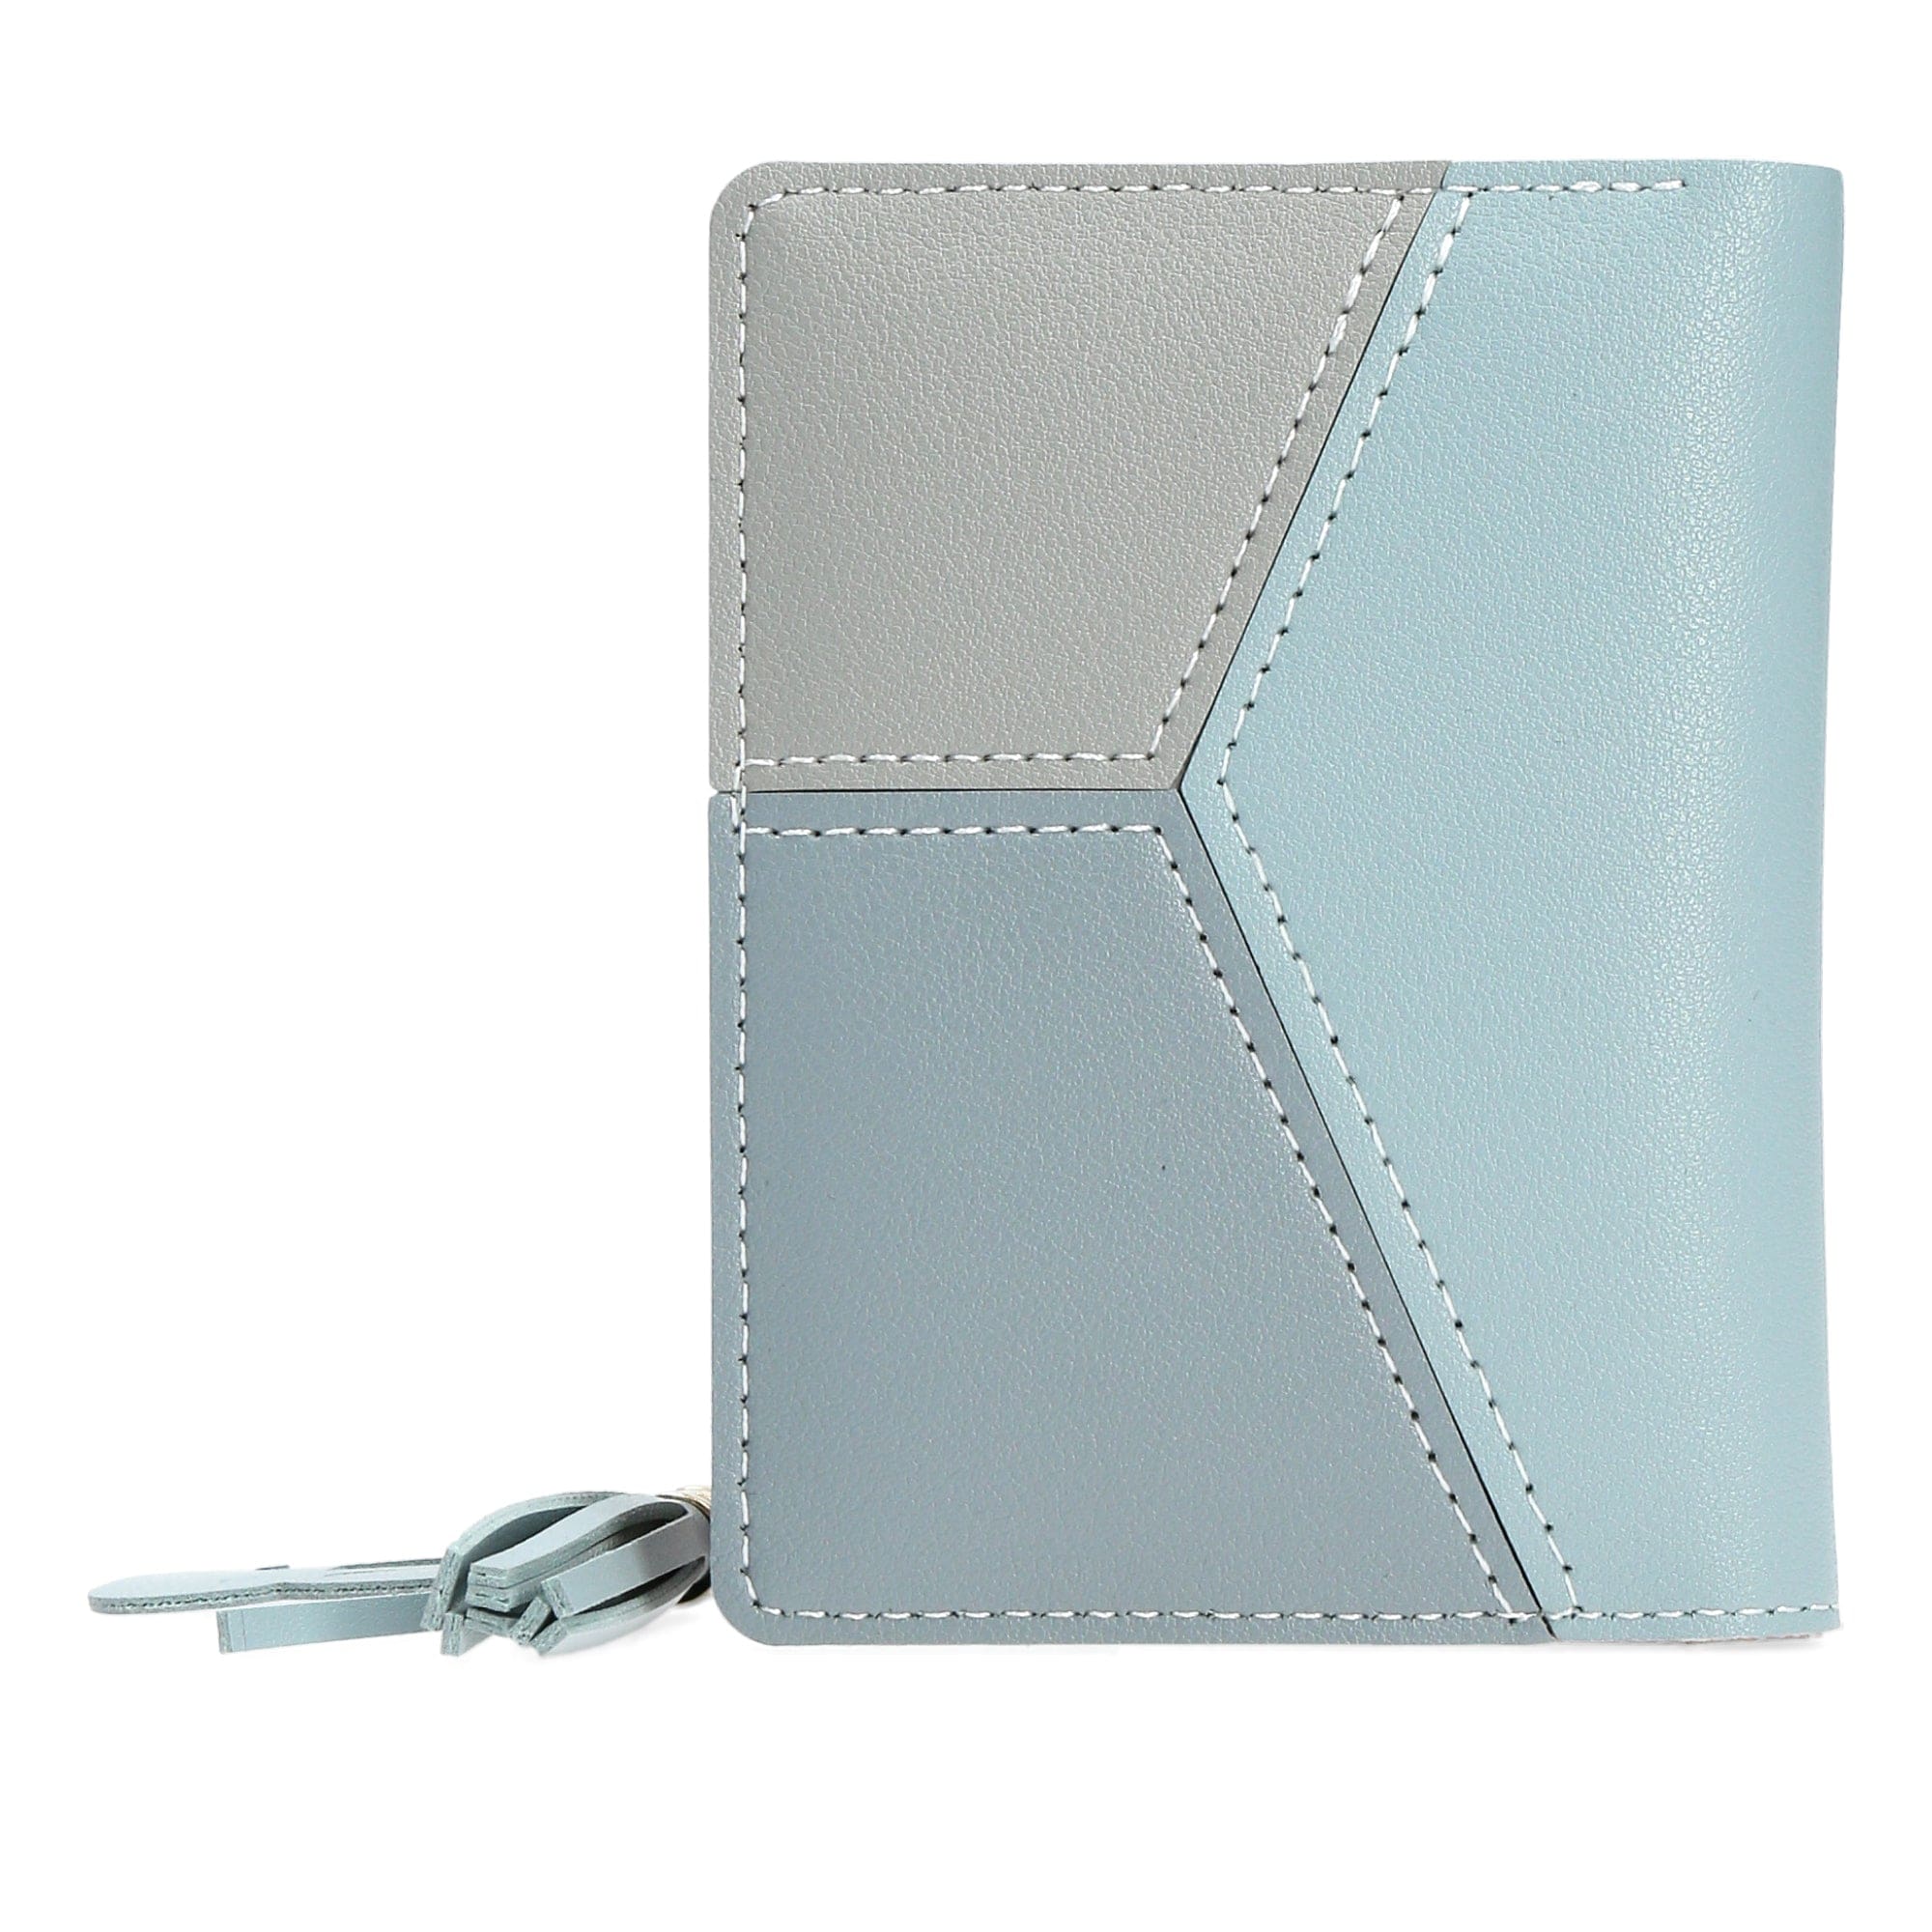 Montmartre cardholder - Blue - Small leather goods